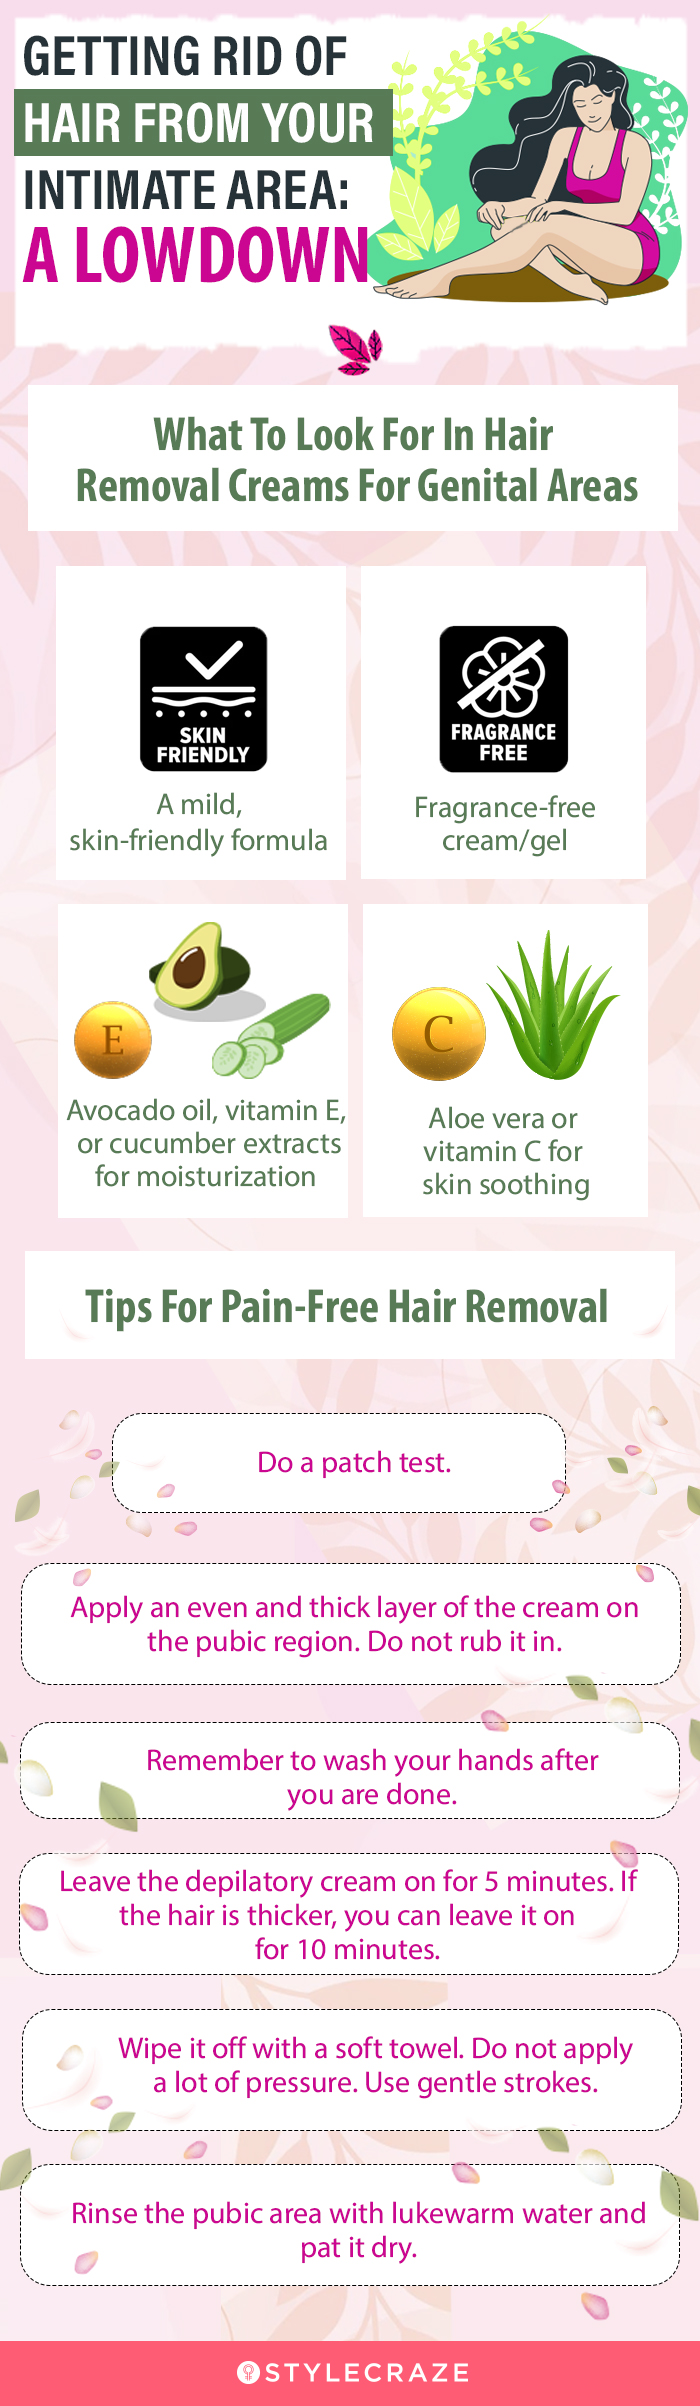 What To Look For In Hair Removal Creams For Genital Areas (infographic)